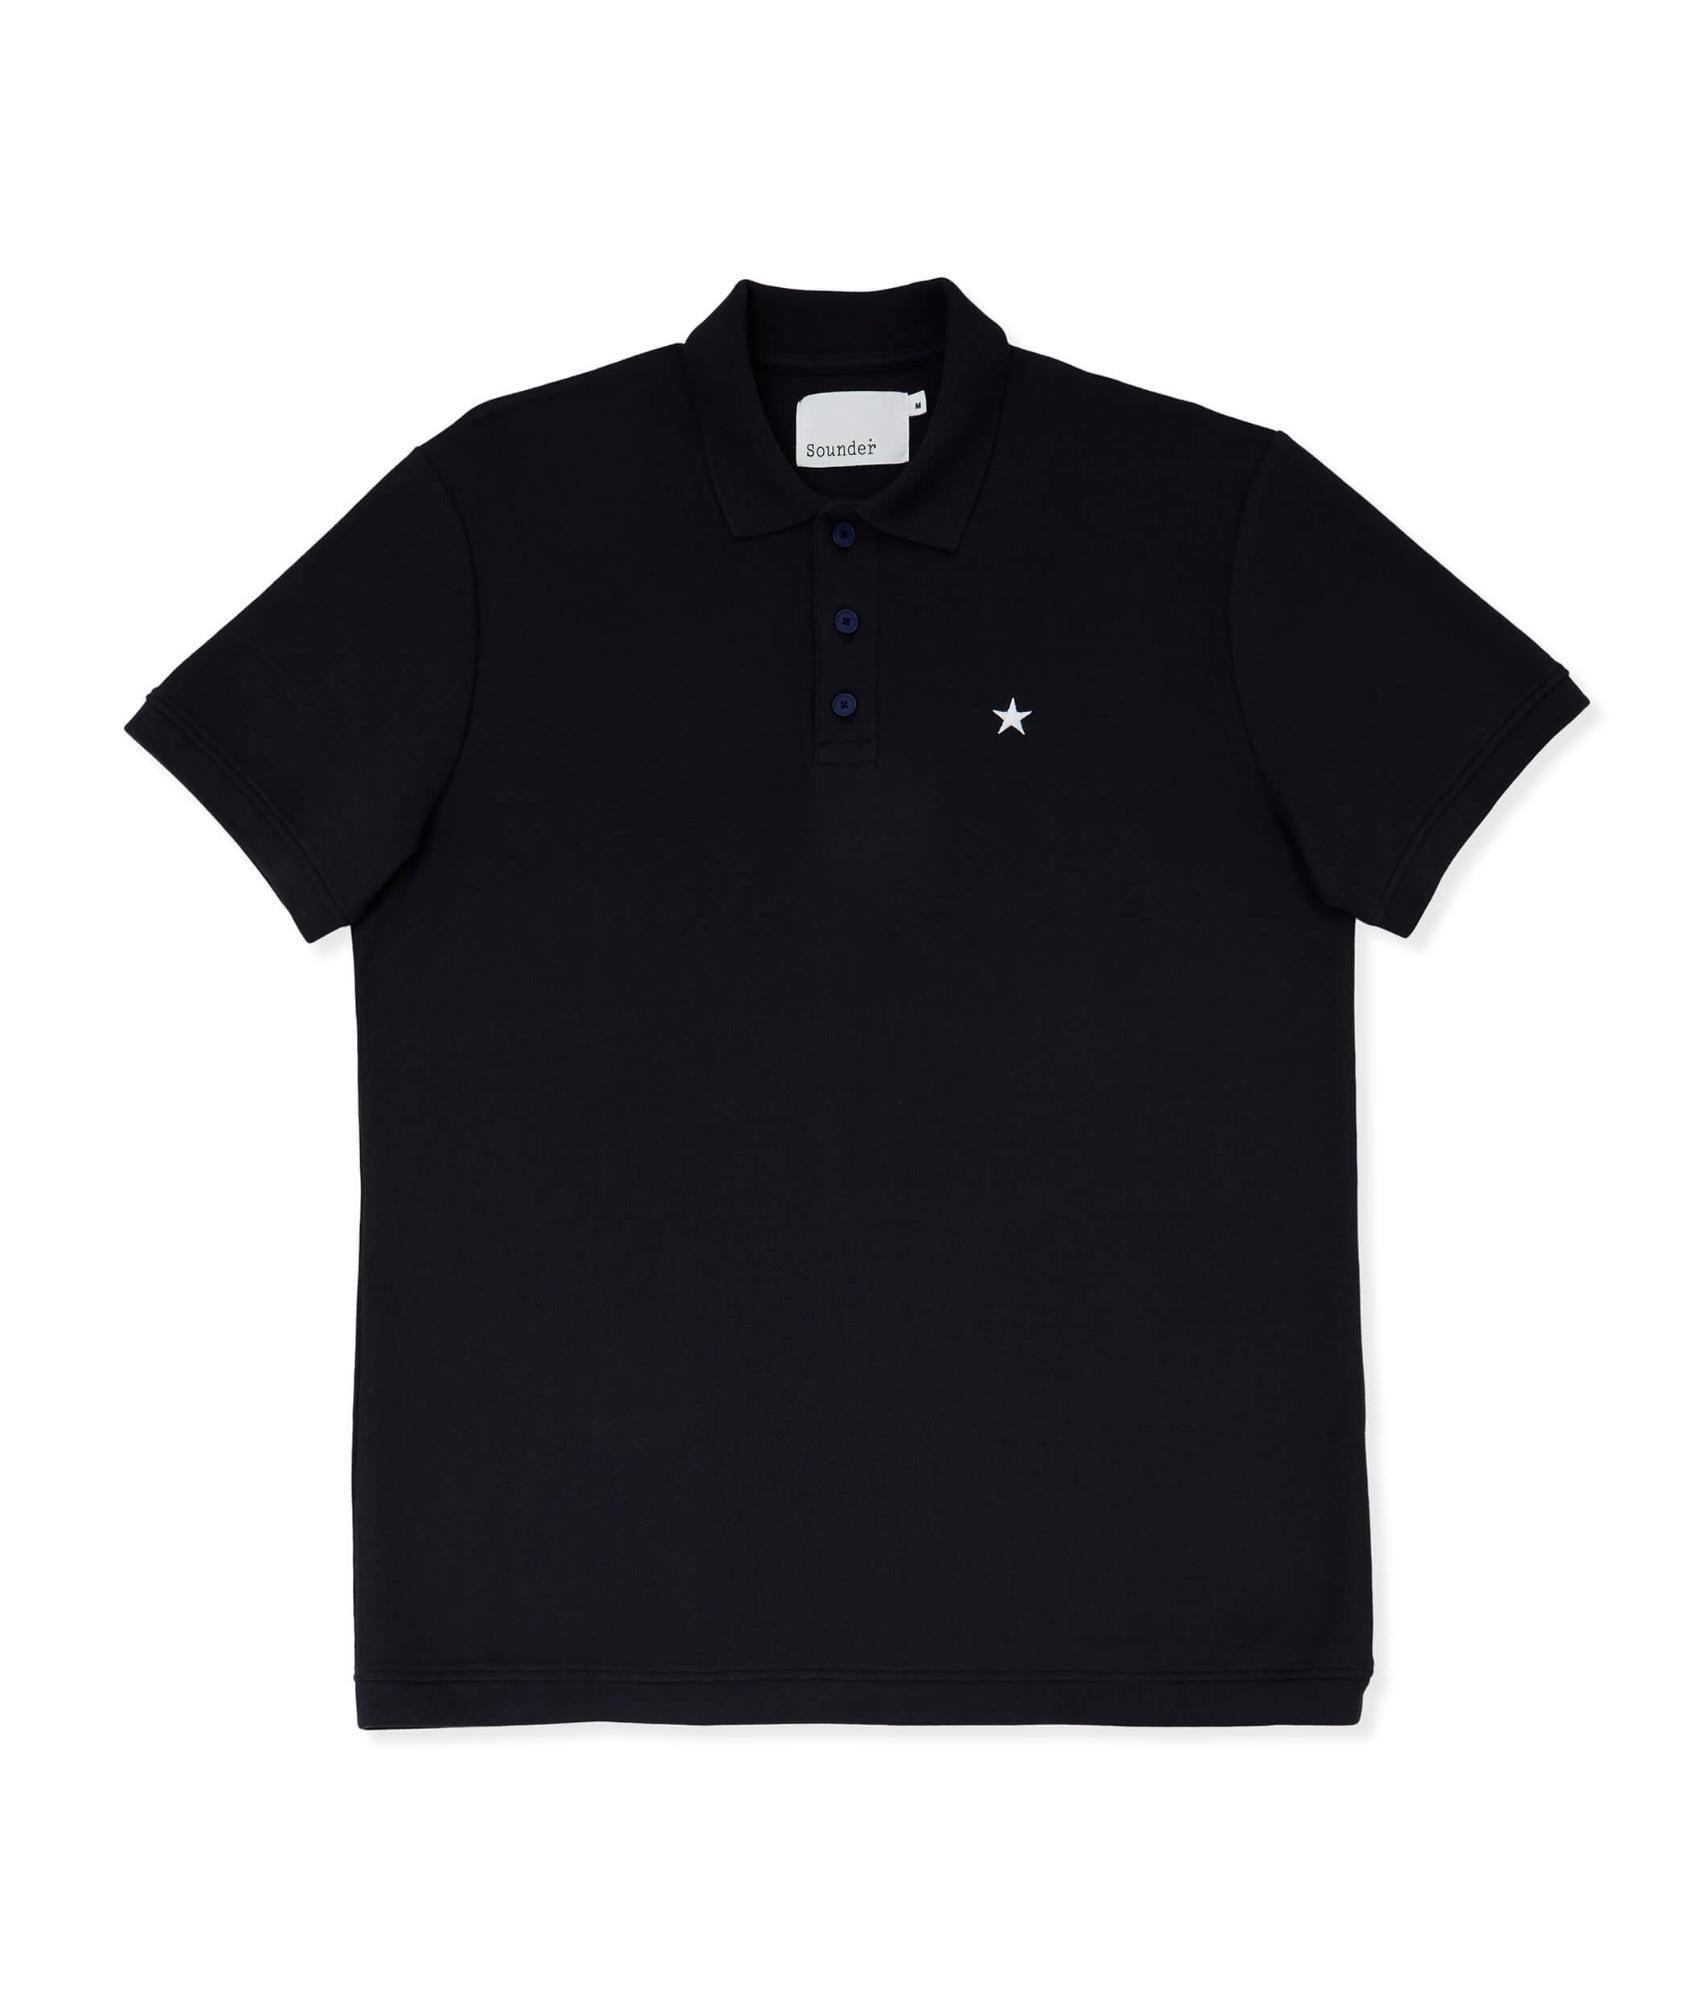 Olive Play Well Pique Cotton Polo image 0